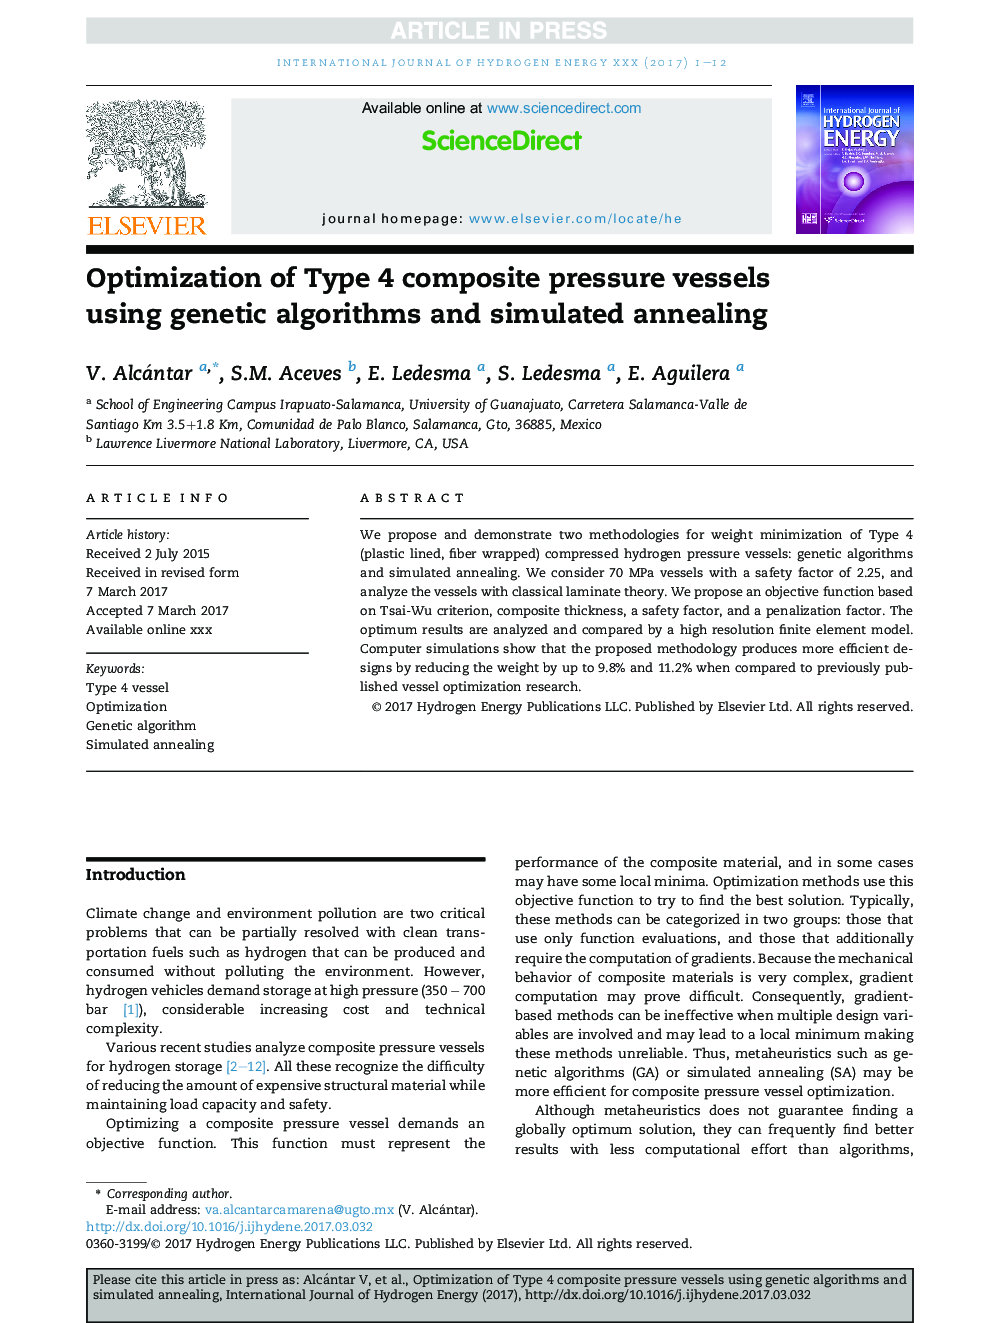 Optimization of Type 4 composite pressure vessels using genetic algorithms and simulated annealing